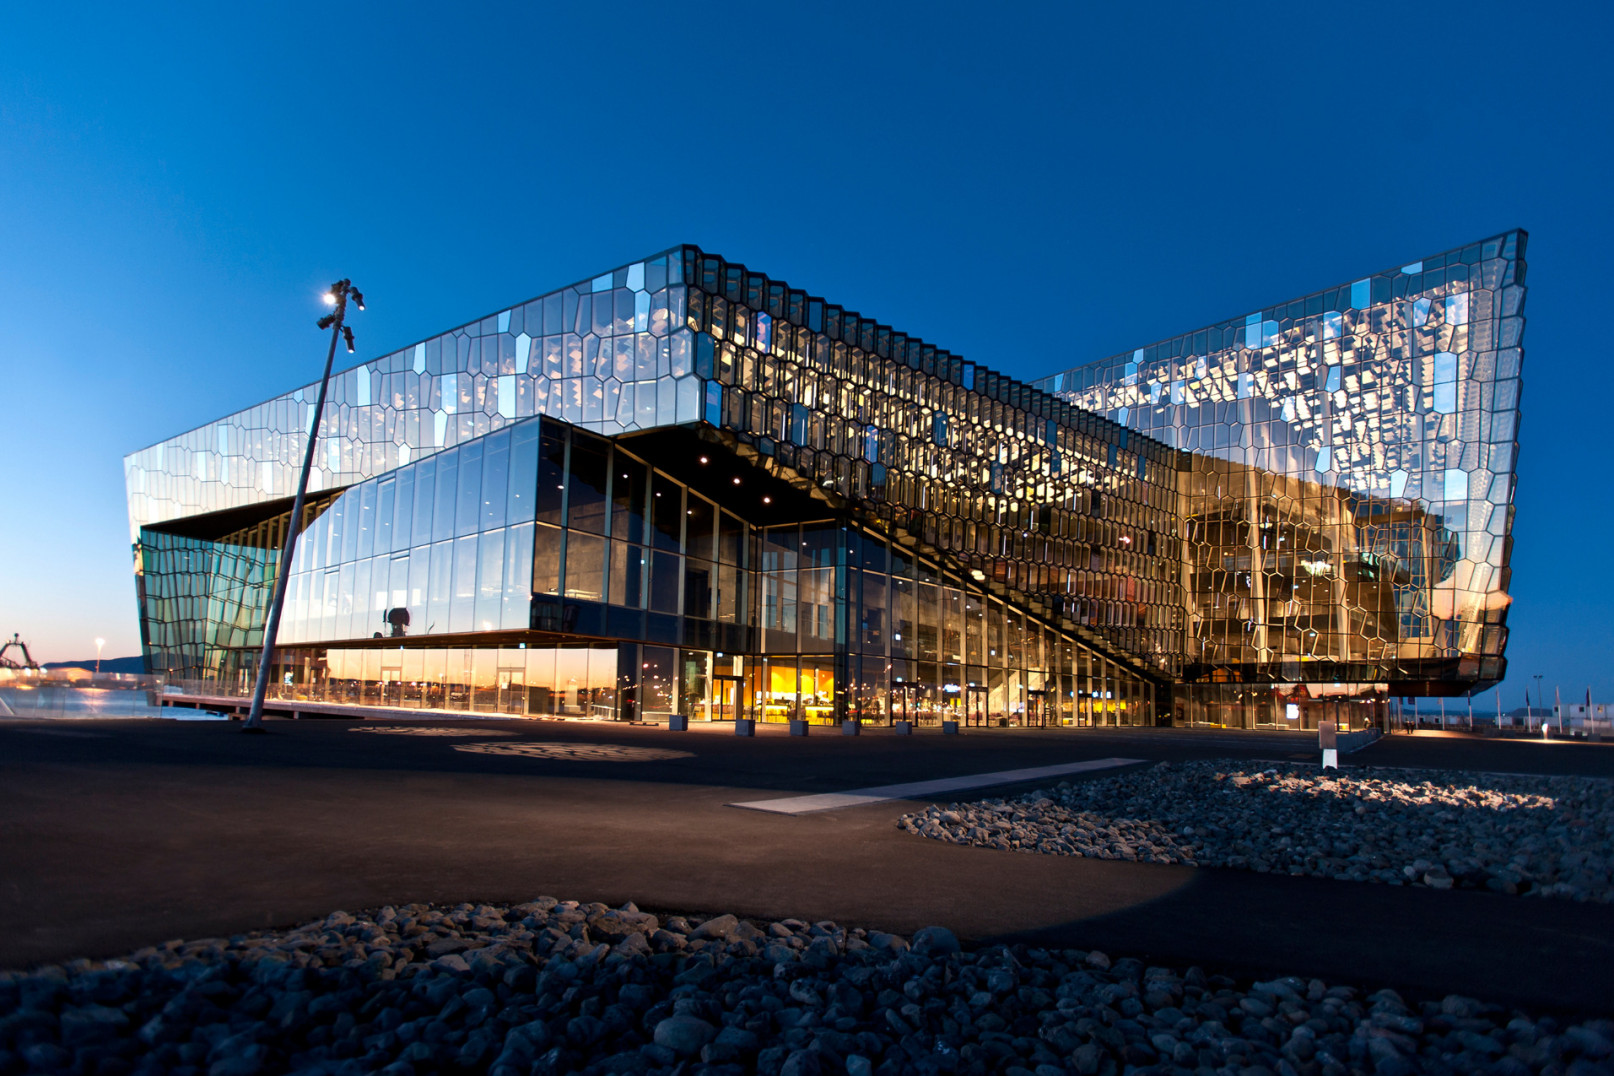 HARPA concert hall and conference center